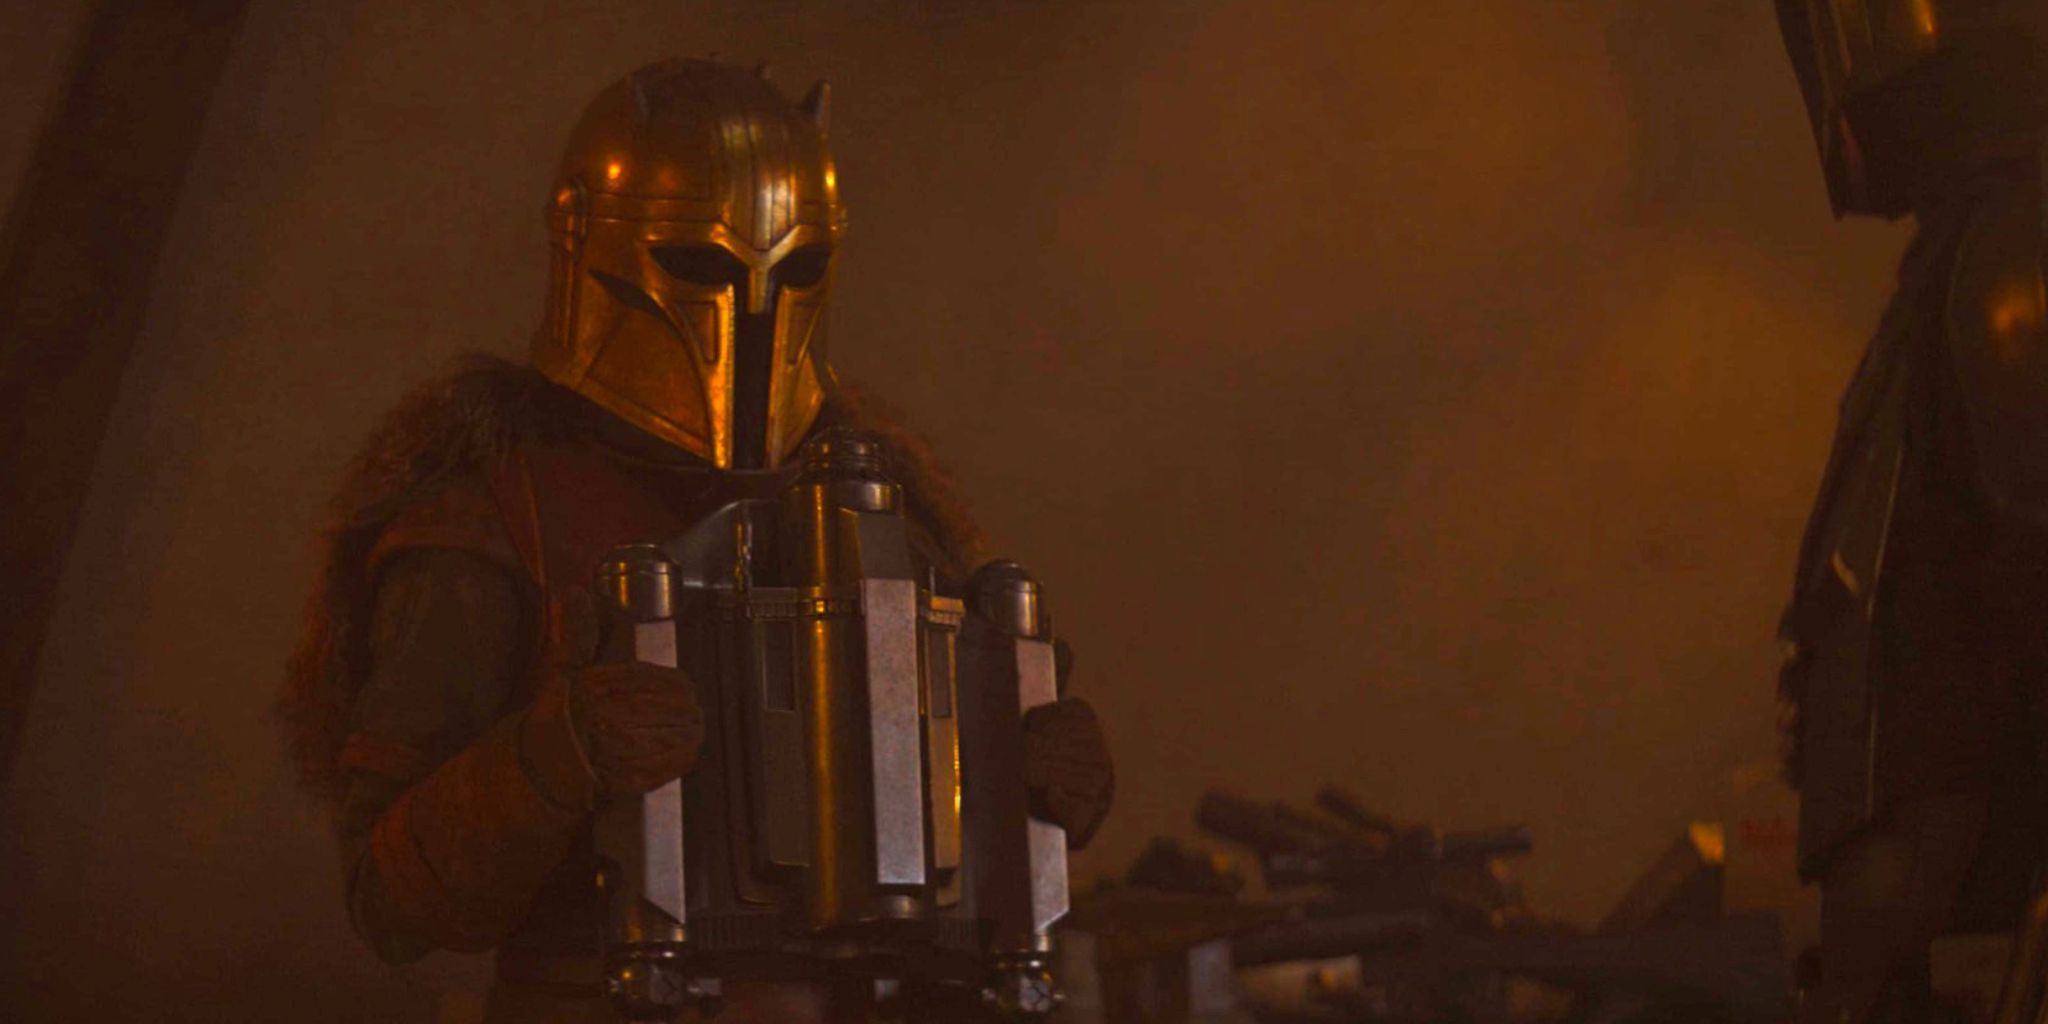 The Armorer gives Din Djarin his jetpack in The Mandalorian